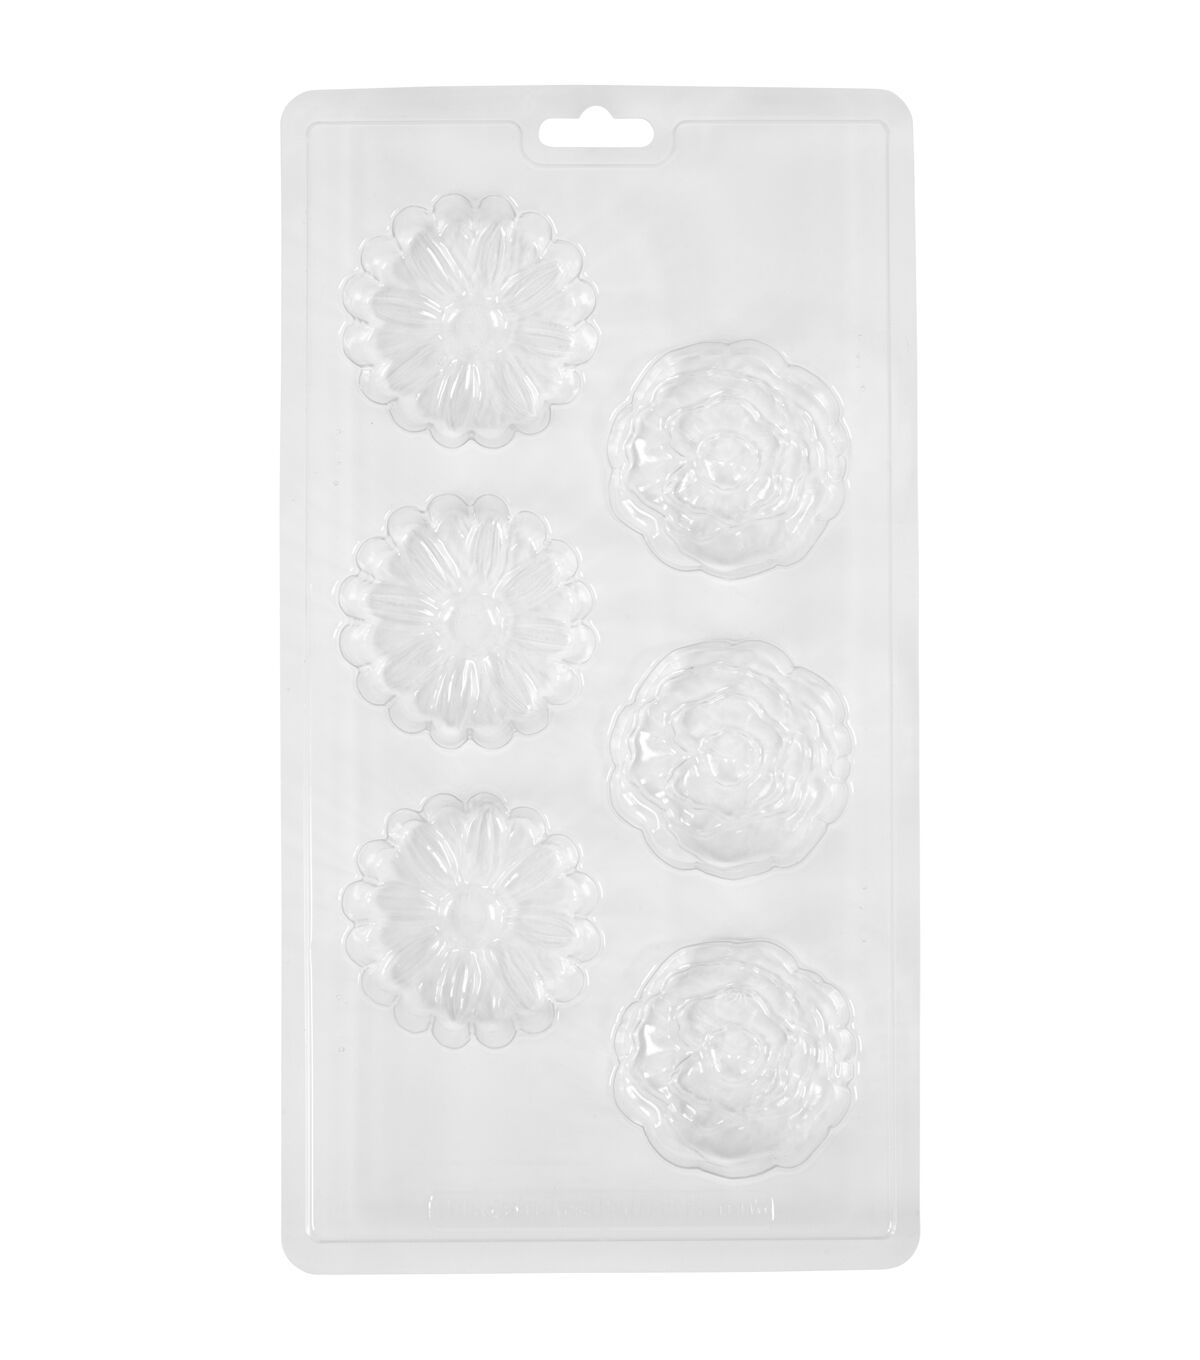 Wilton 2115-1430 Dancing Daisies Candy Mold